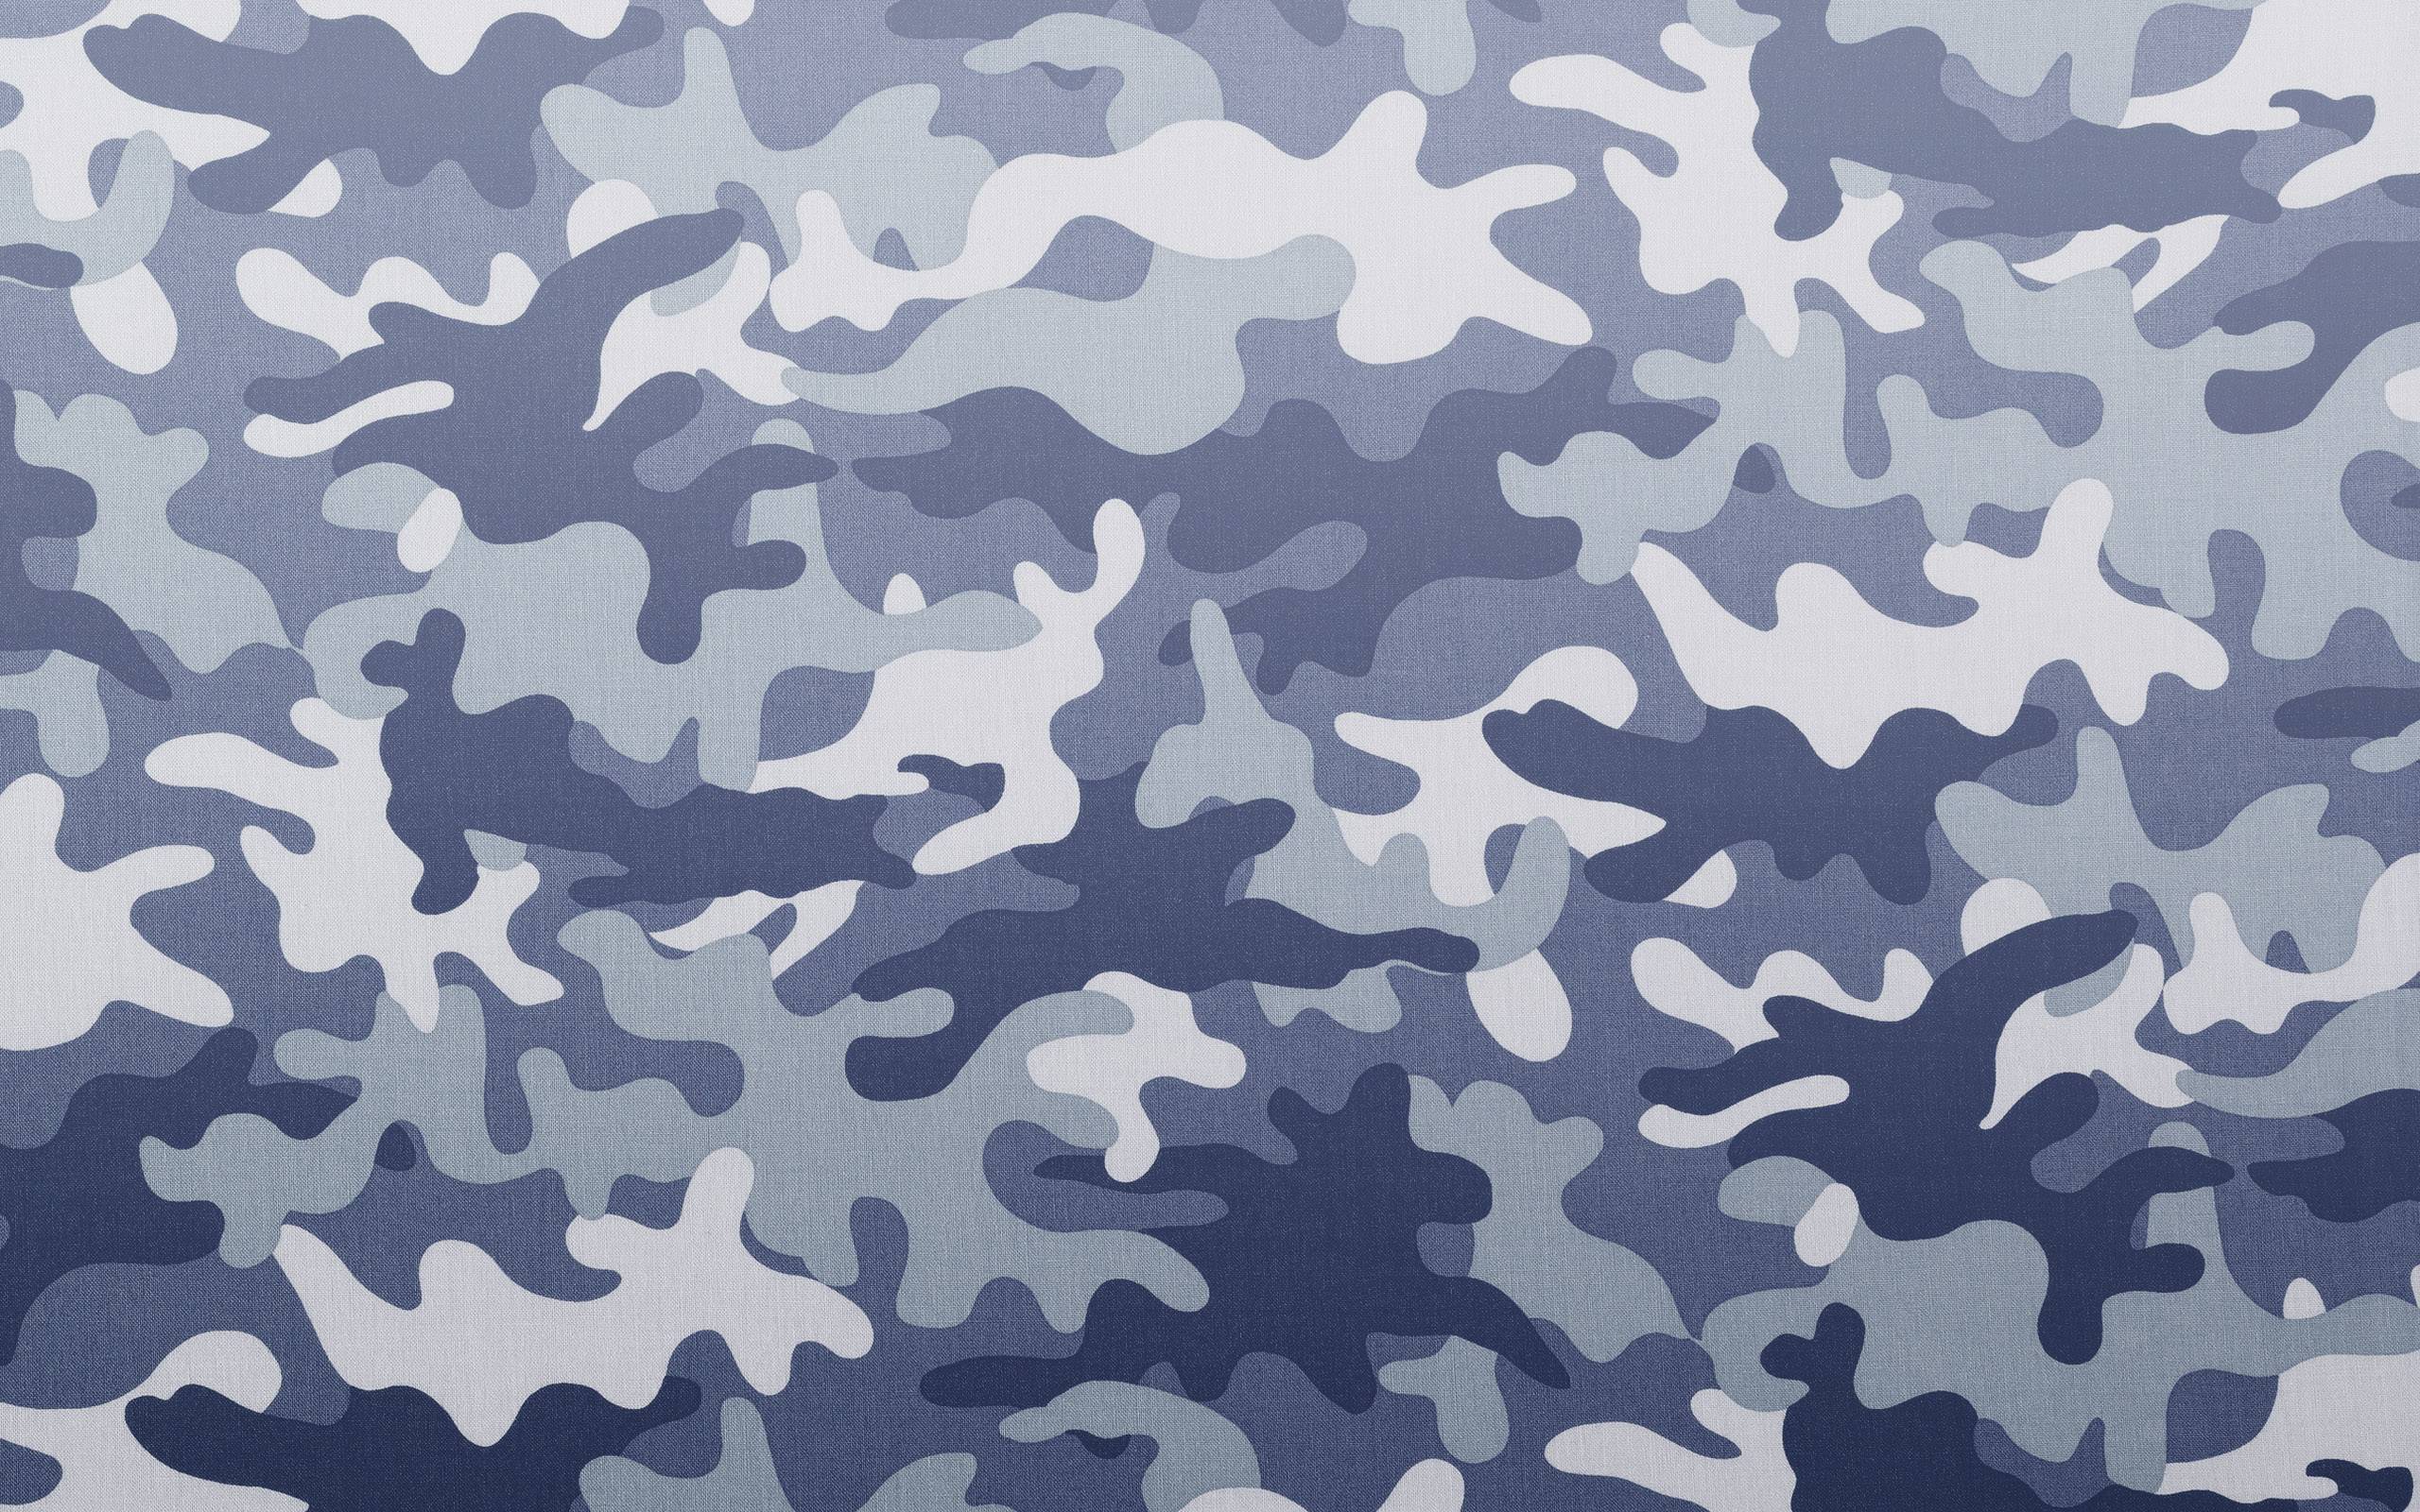 Camouflage Wallpaper, 38 High Quality Camouflage Wallpaper. Full